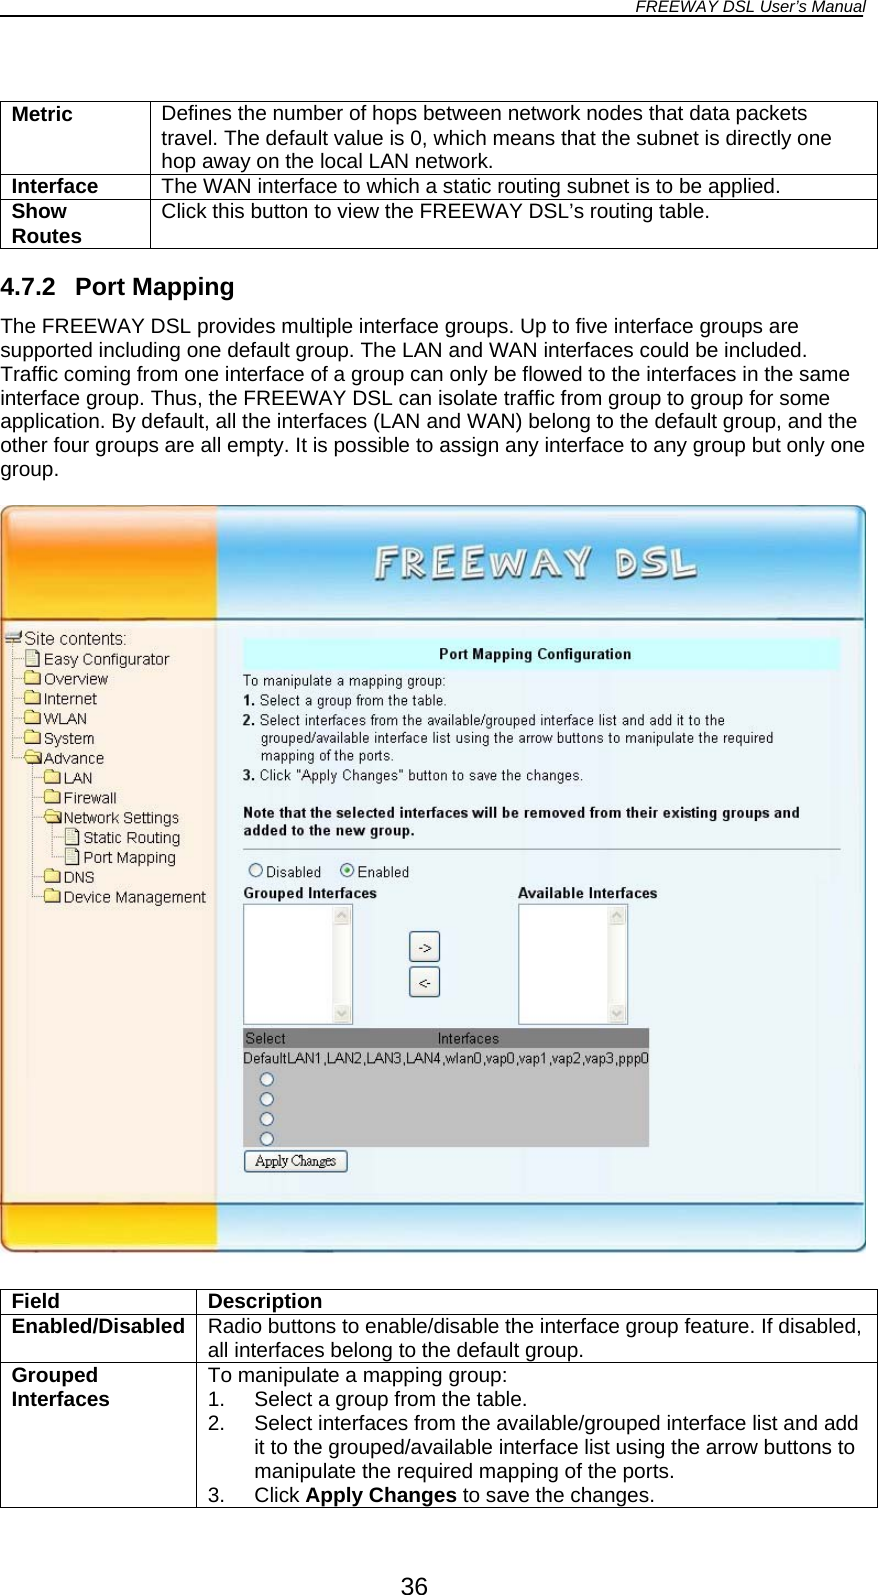 FREEWAY DSL User’s Manual   Metric  Defines the number of hops between network nodes that data packets travel. The default value is 0, which means that the subnet is directly one hop away on the local LAN network. Interface  The WAN interface to which a static routing subnet is to be applied. Show Routes  Click this button to view the FREEWAY DSL’s routing table.  4.7.2 Port Mapping The FREEWAY DSL provides multiple interface groups. Up to five interface groups are supported including one default group. The LAN and WAN interfaces could be included. Traffic coming from one interface of a group can only be flowed to the interfaces in the same interface group. Thus, the FREEWAY DSL can isolate traffic from group to group for some application. By default, all the interfaces (LAN and WAN) belong to the default group, and the other four groups are all empty. It is possible to assign any interface to any group but only one group.    Field Description Enabled/Disabled Radio buttons to enable/disable the interface group feature. If disabled, all interfaces belong to the default group. Grouped Interfaces  To manipulate a mapping group: 1.  Select a group from the table. 2.  Select interfaces from the available/grouped interface list and add it to the grouped/available interface list using the arrow buttons to manipulate the required mapping of the ports. 3. Click Apply Changes to save the changes. 36 